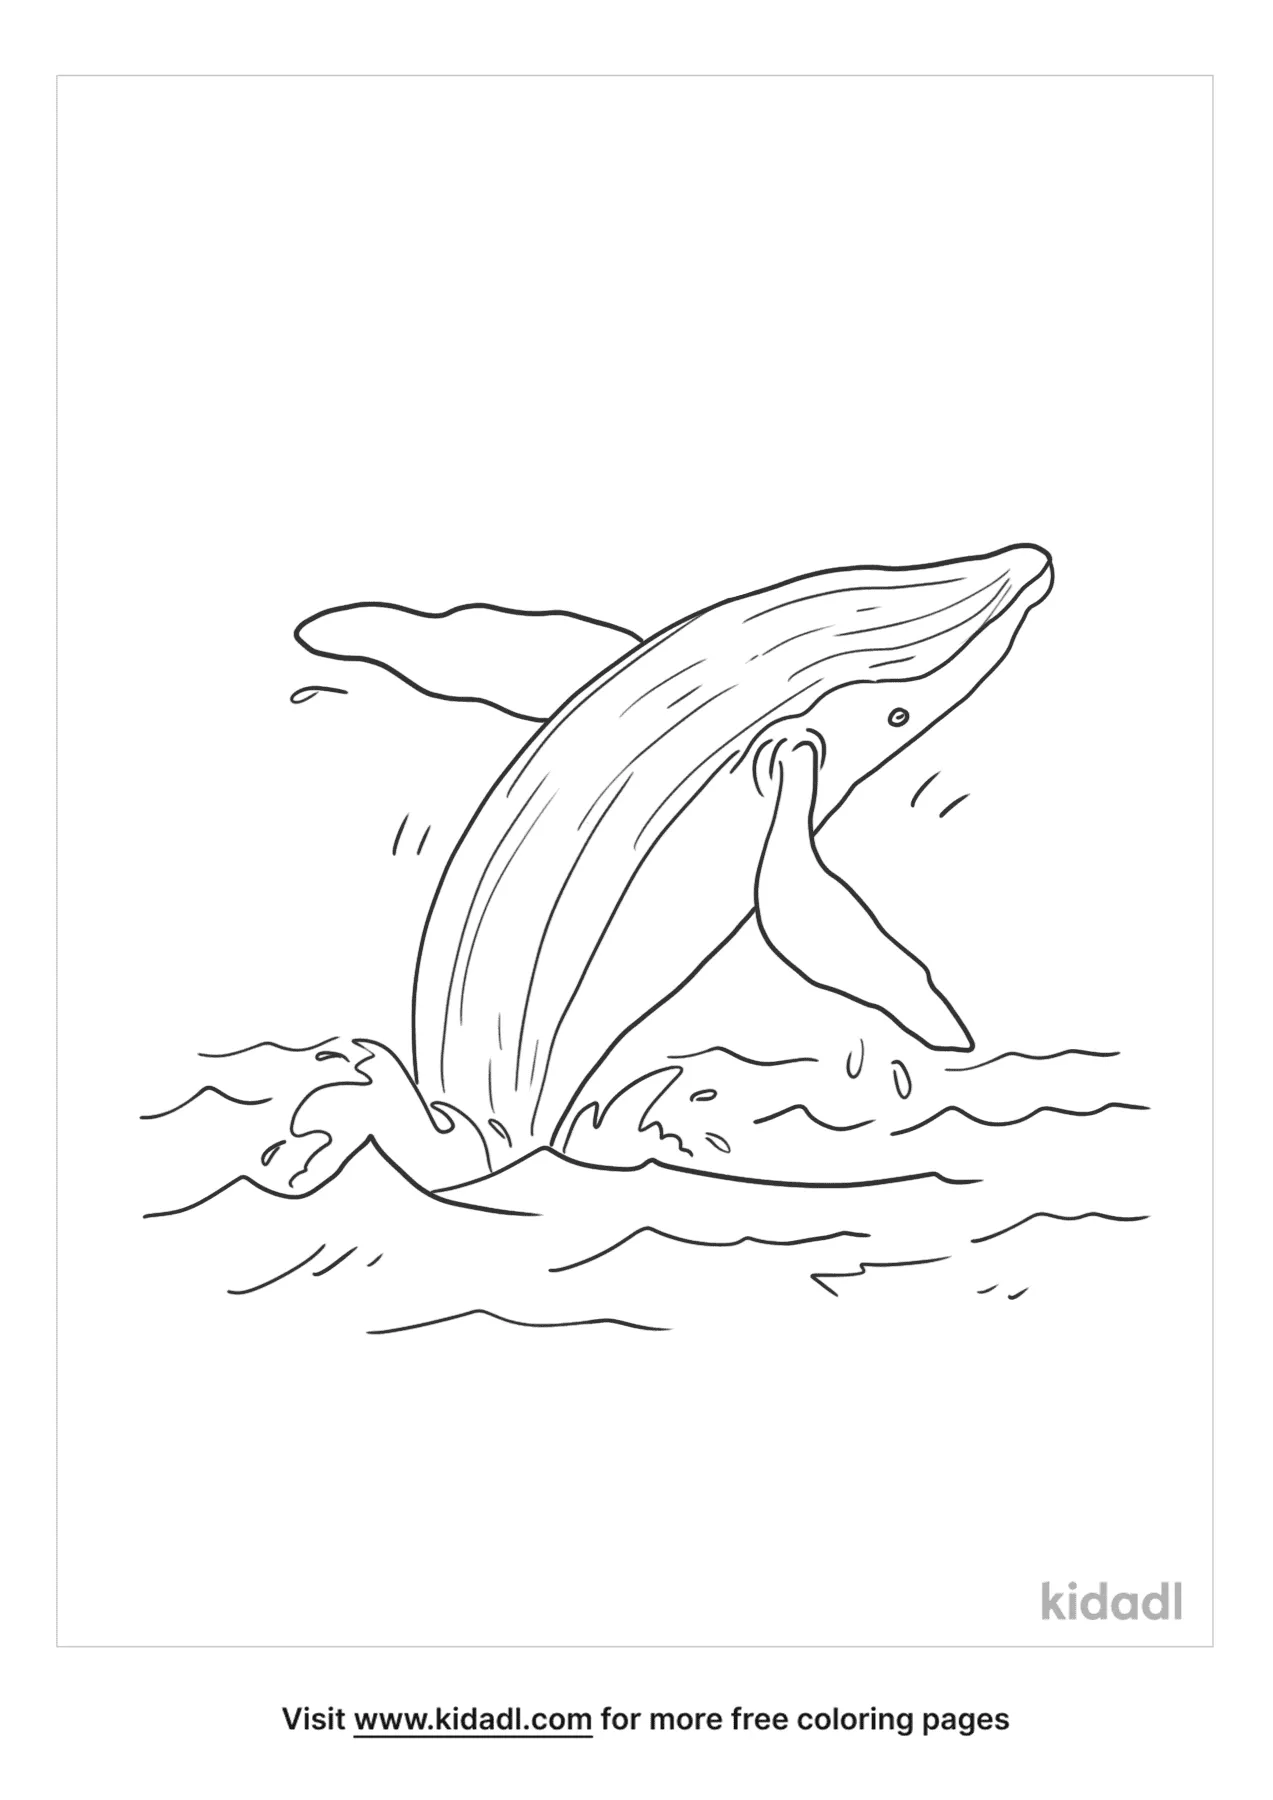 humpback whale coloring pages